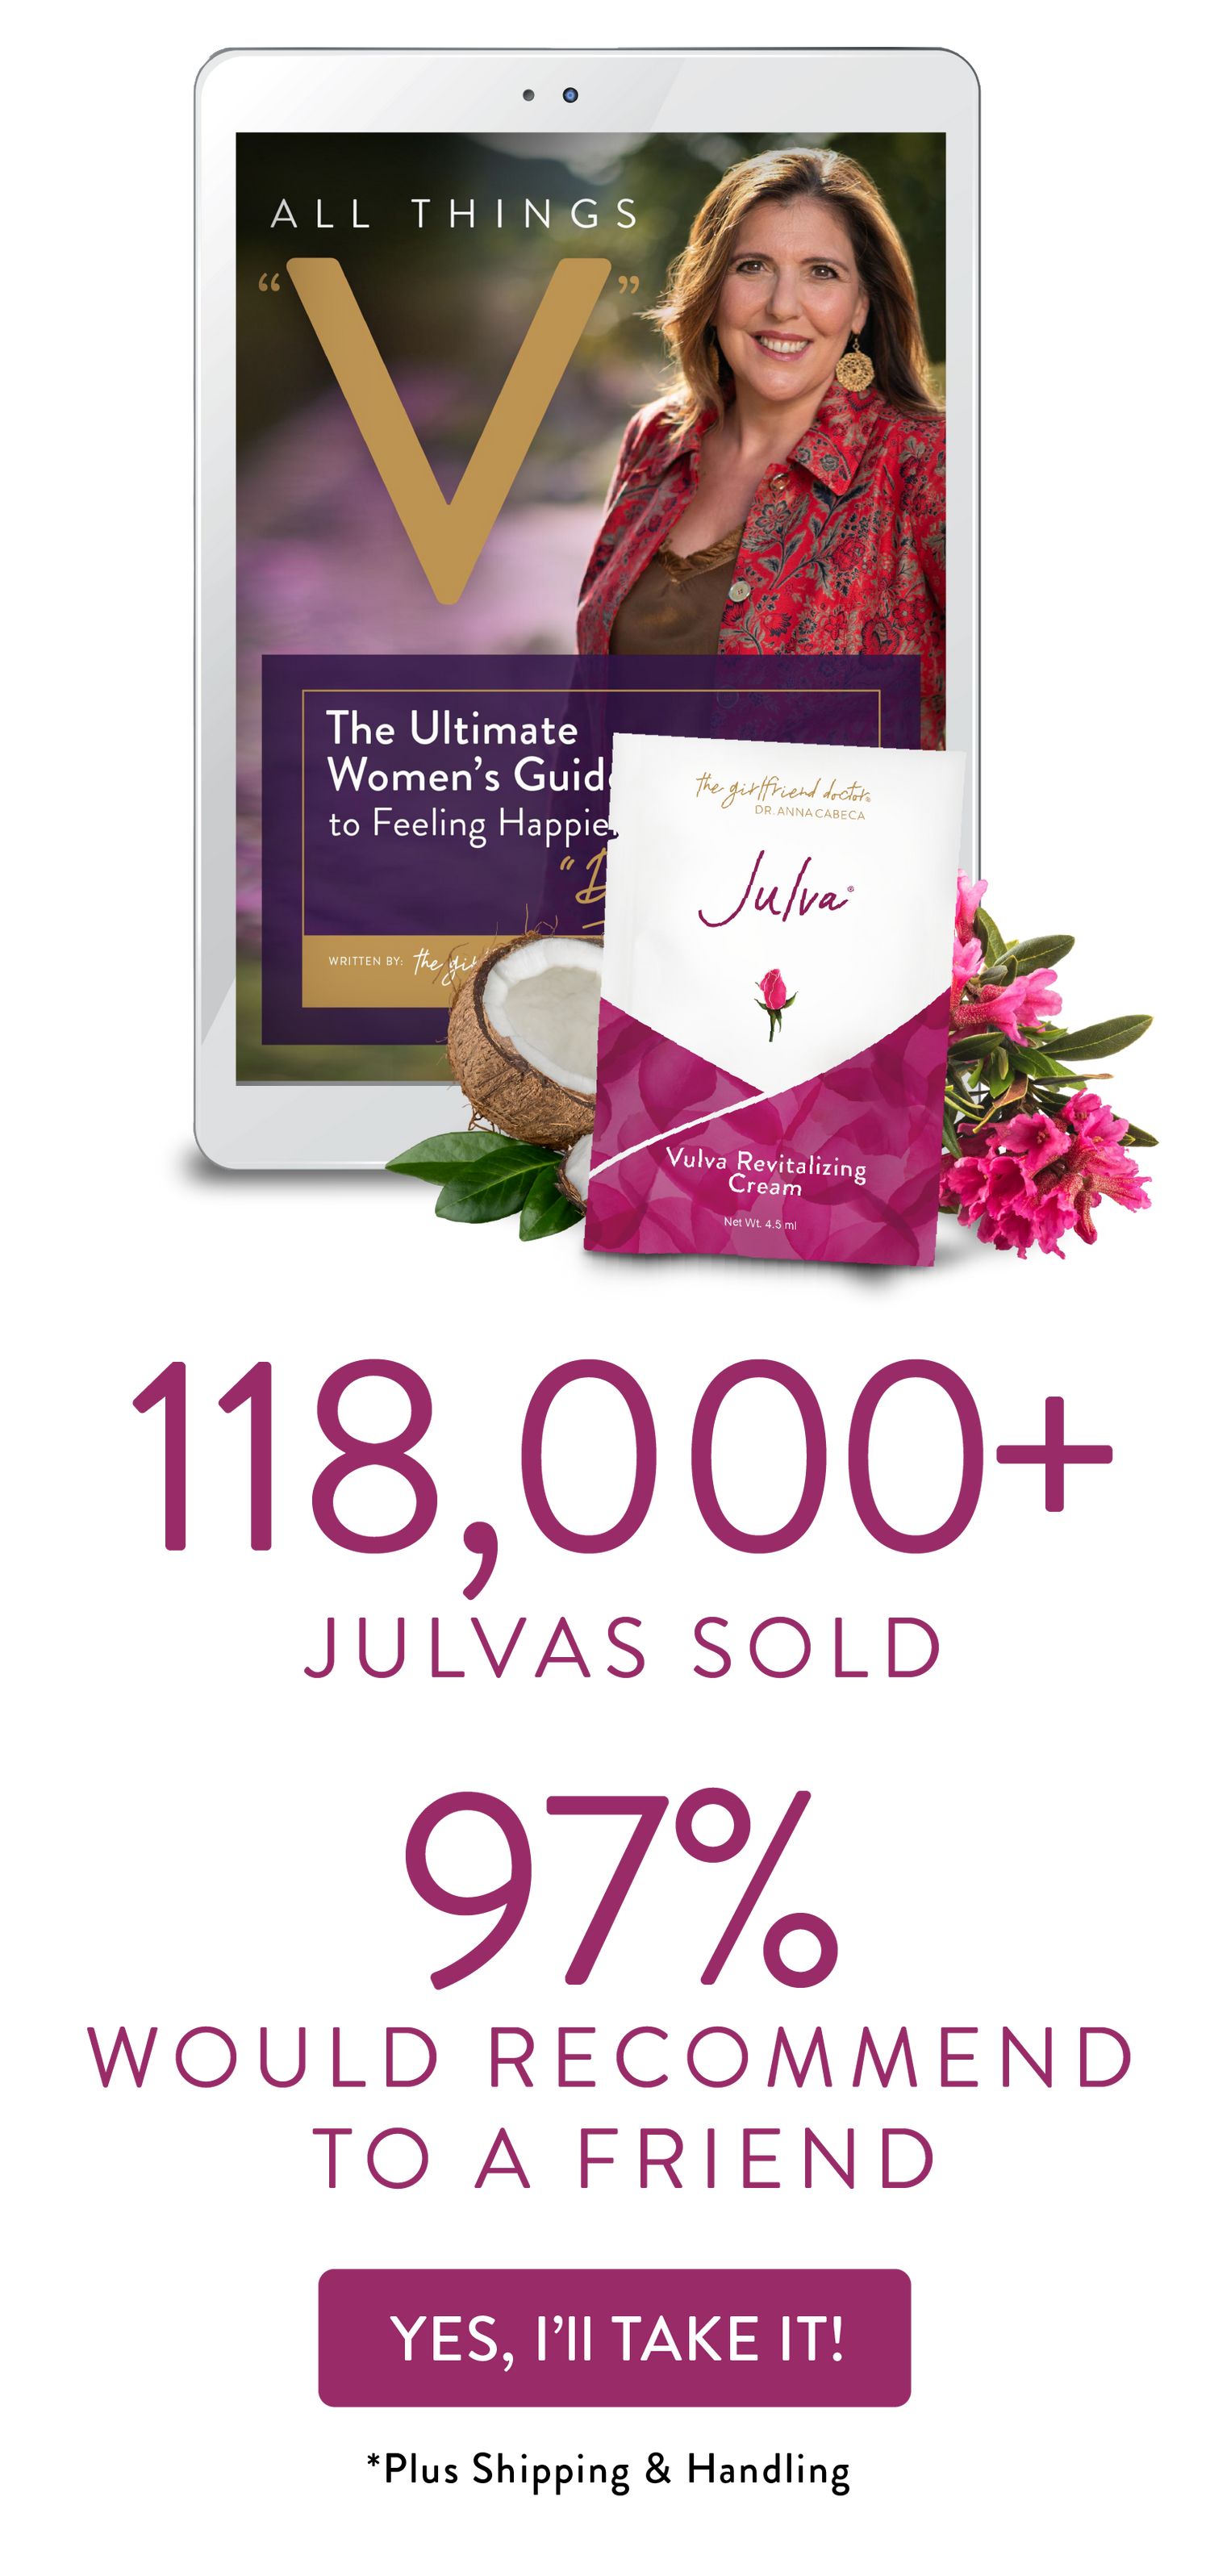 118,000+ Julvas sold. 97% would recommend to a friend. Yes, I'll Take It!